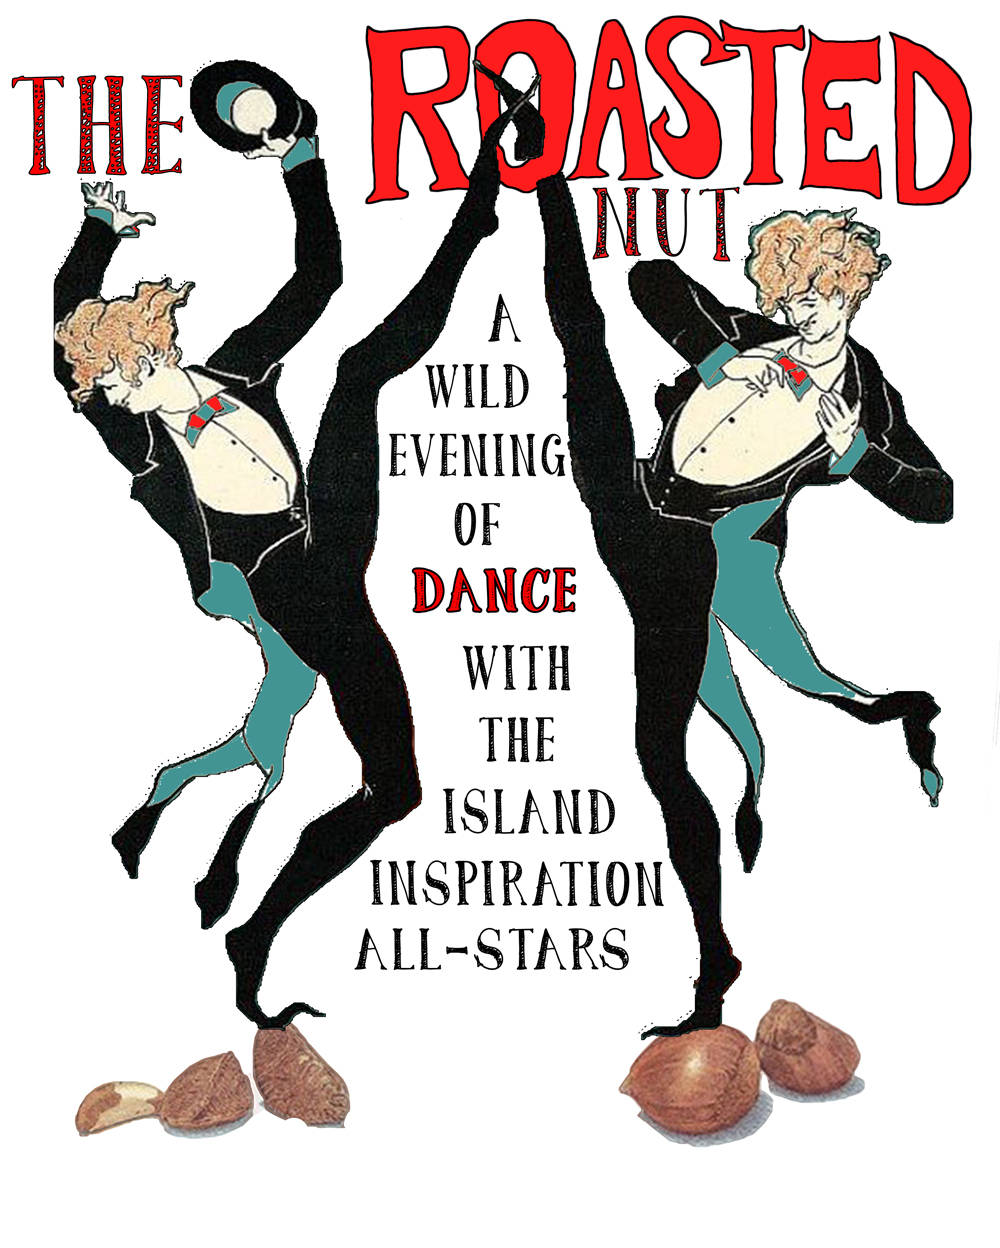 A Wild Evening of Dance with “The Roasted Nut Too”